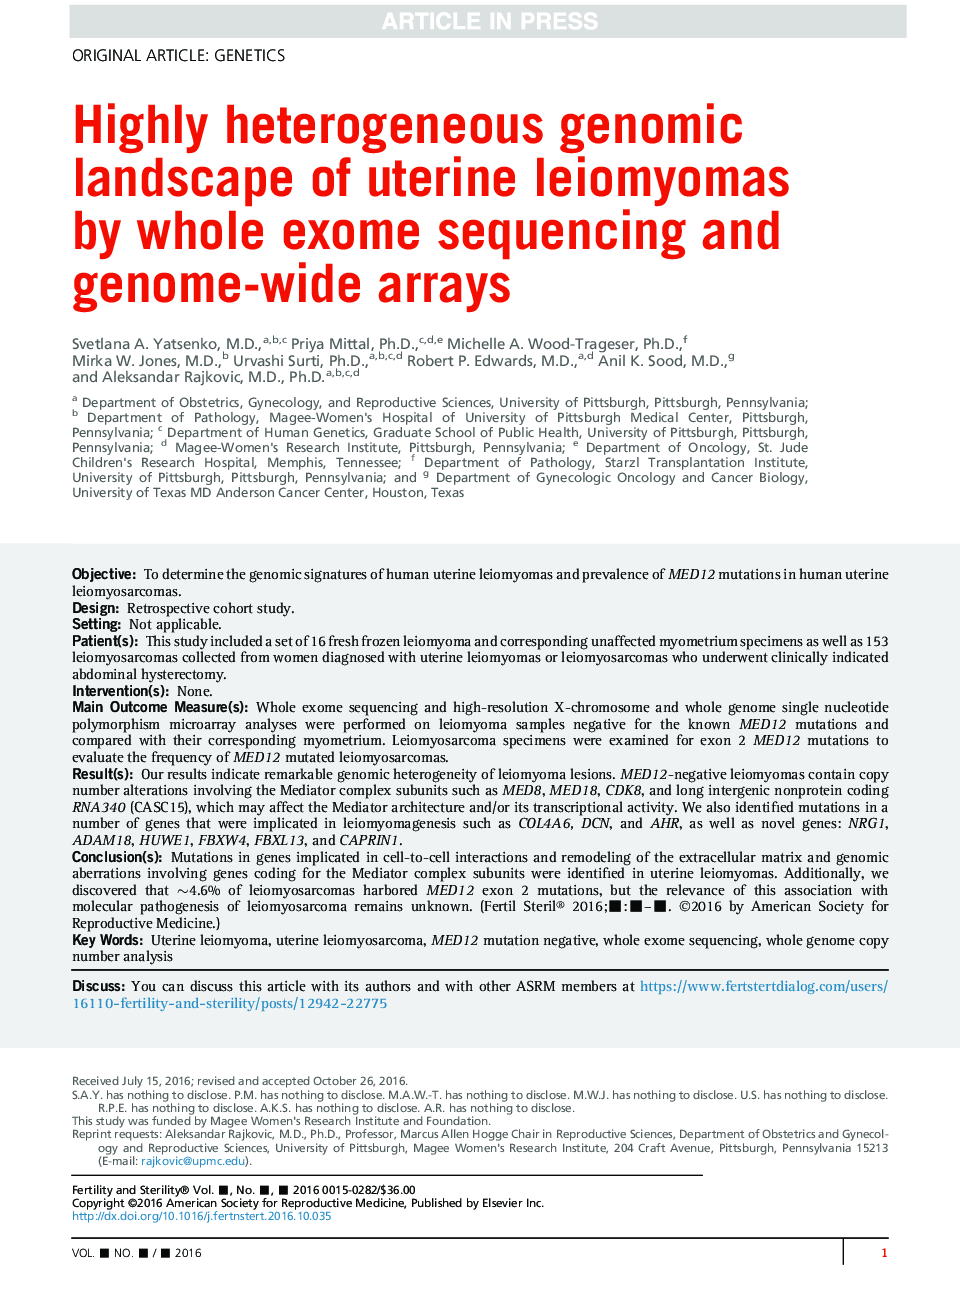 Highly heterogeneous genomic landscape of uterine leiomyomas byÂ whole exome sequencing and genome-wide arrays